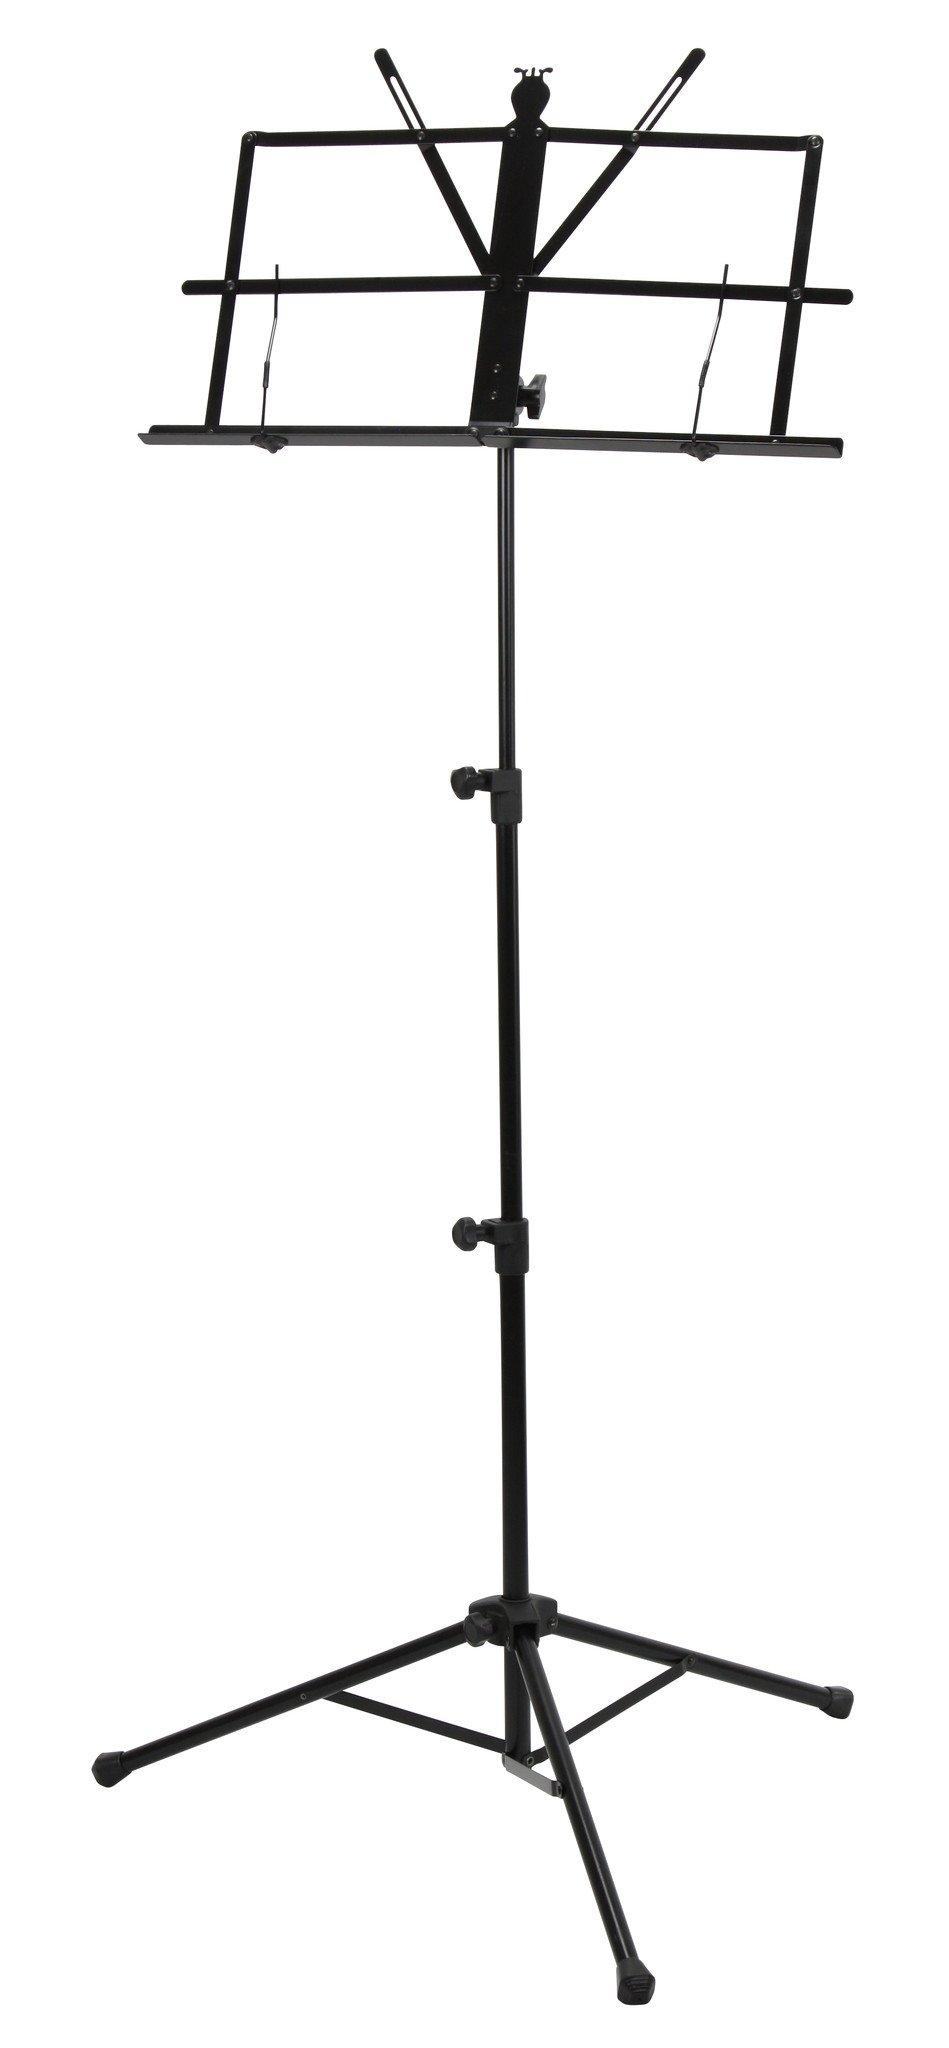 Deluxe 3-Part Folding Music Stand W/Bag - Black